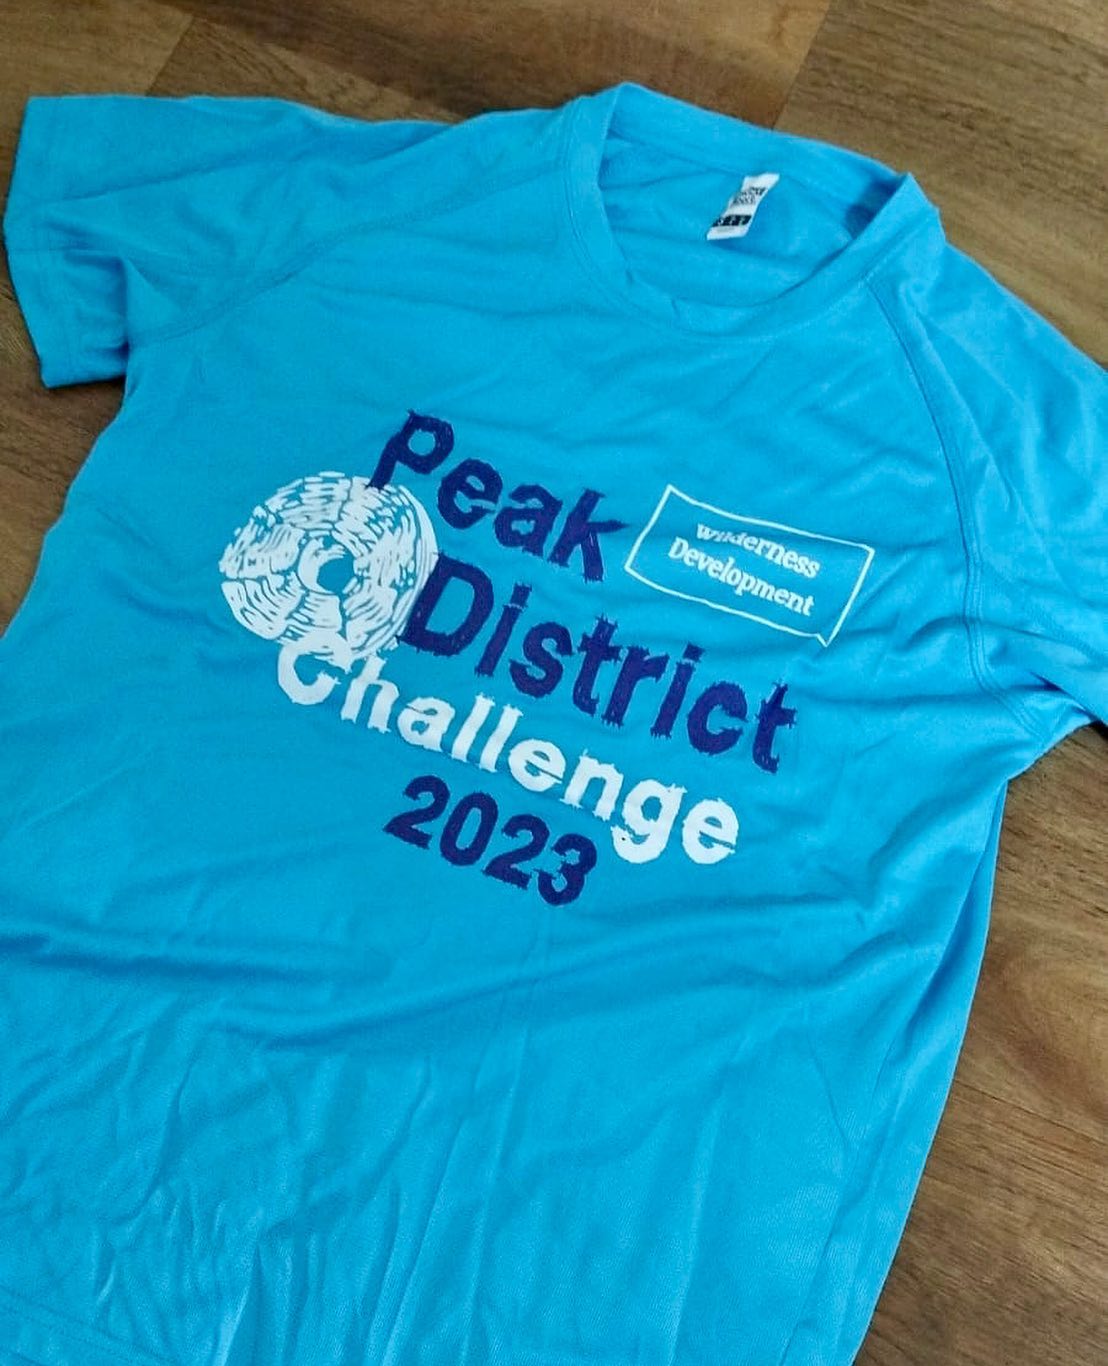 Commemorate your achievement with our 2023 event merchandise - available at https://peakdistrictc...